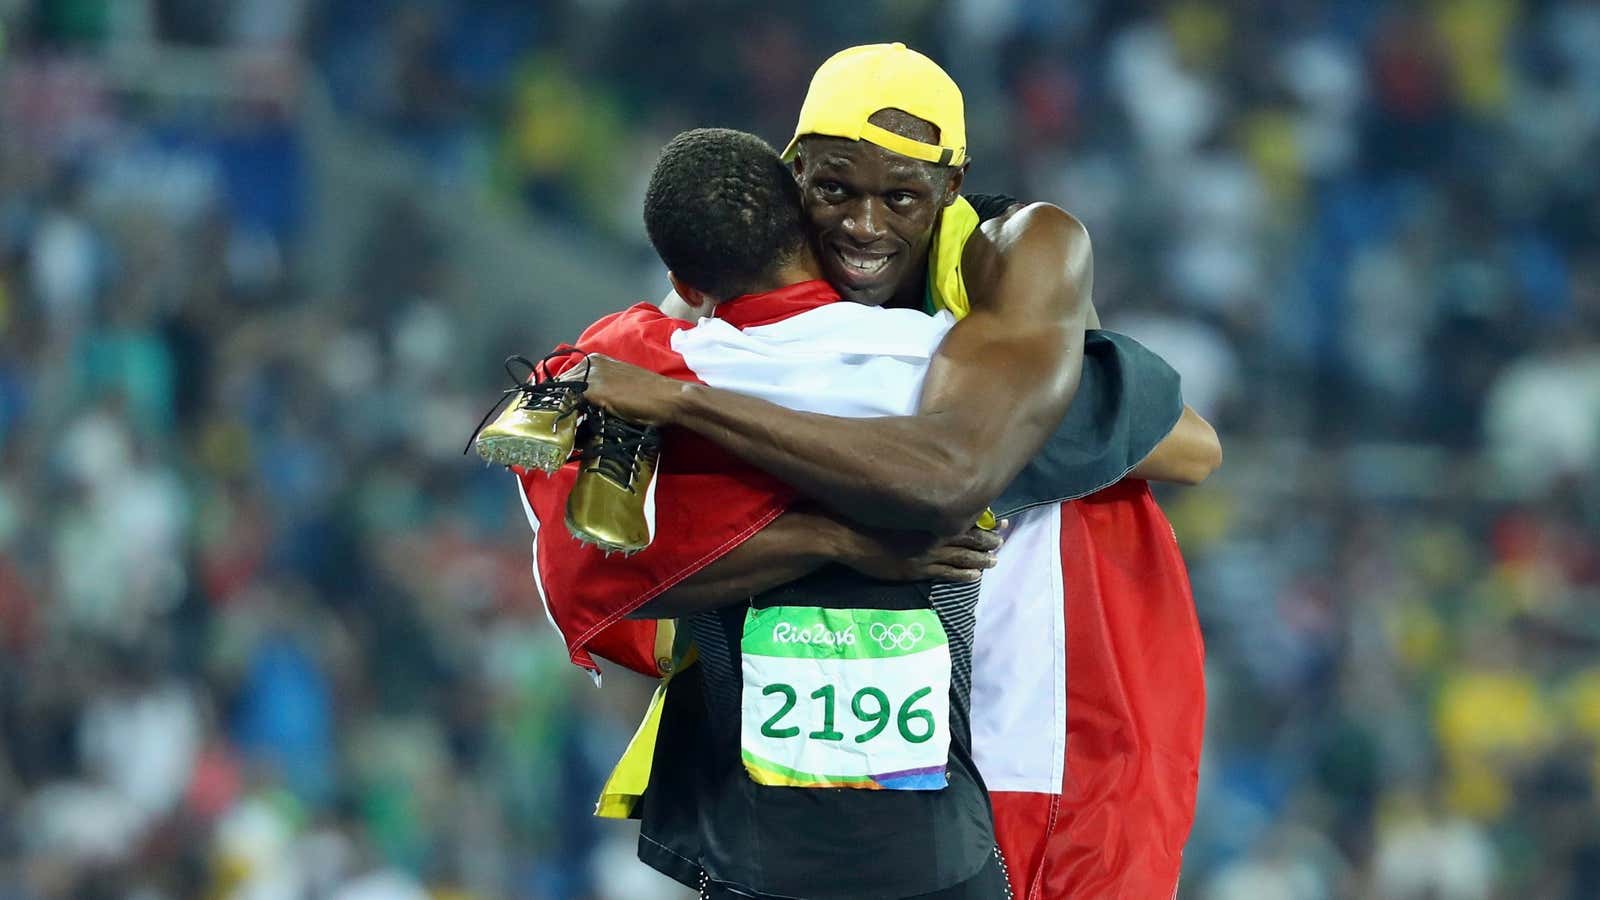 Bronze medallist Andre De Grasse of Canada hugs gold medallist Usain Bolt after the Men’s 100m Final—but the middle child is nowhere in sight.